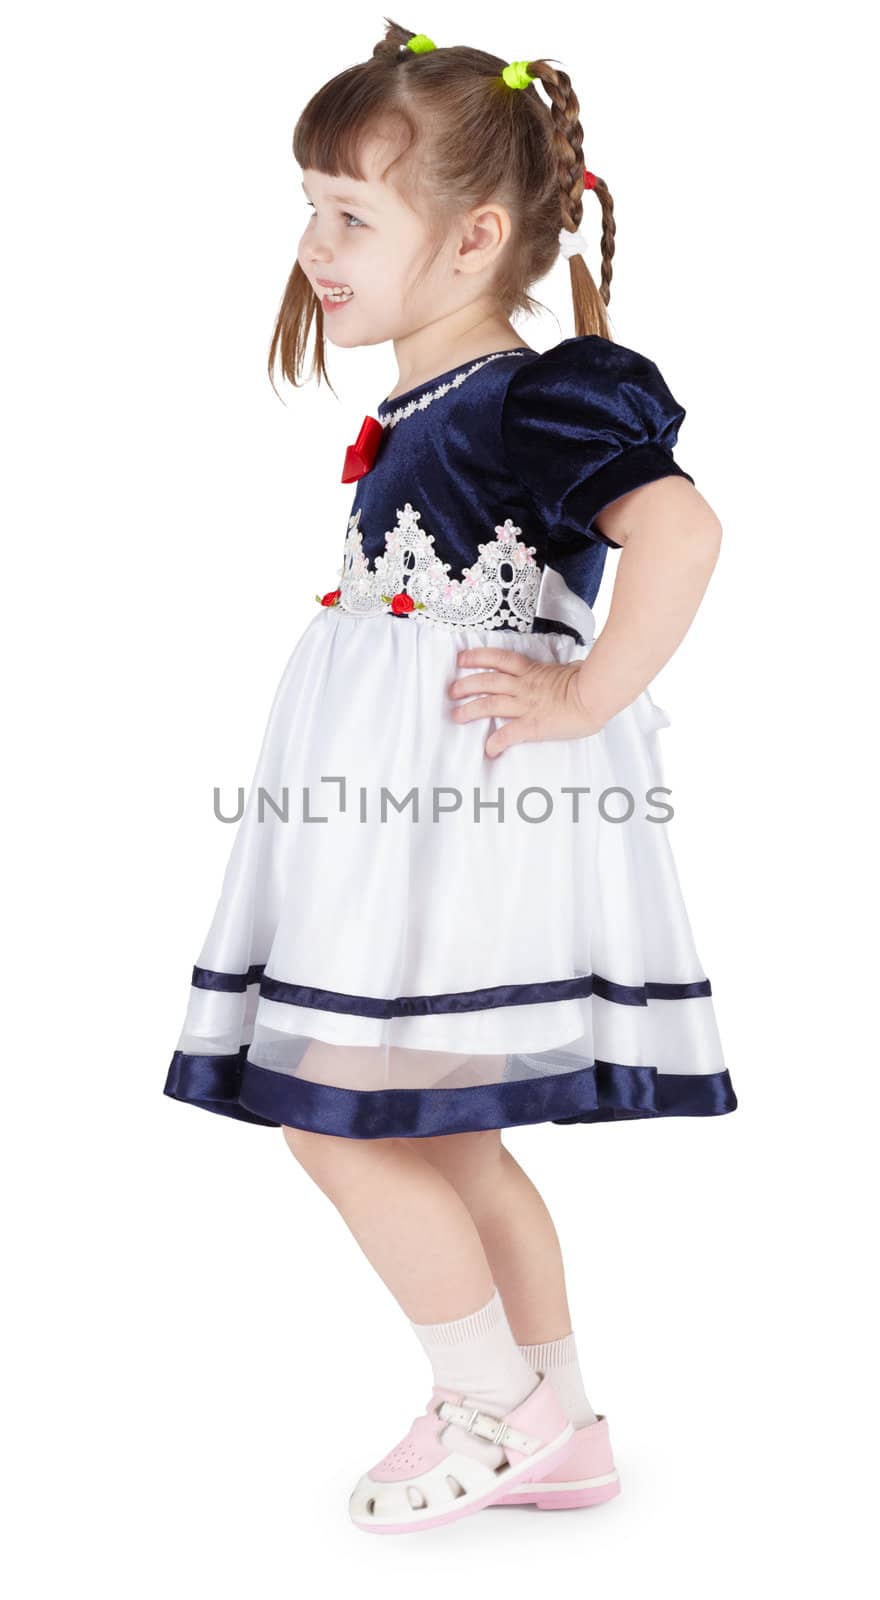 Funny little girl in beautiful dress on white background by pzaxe